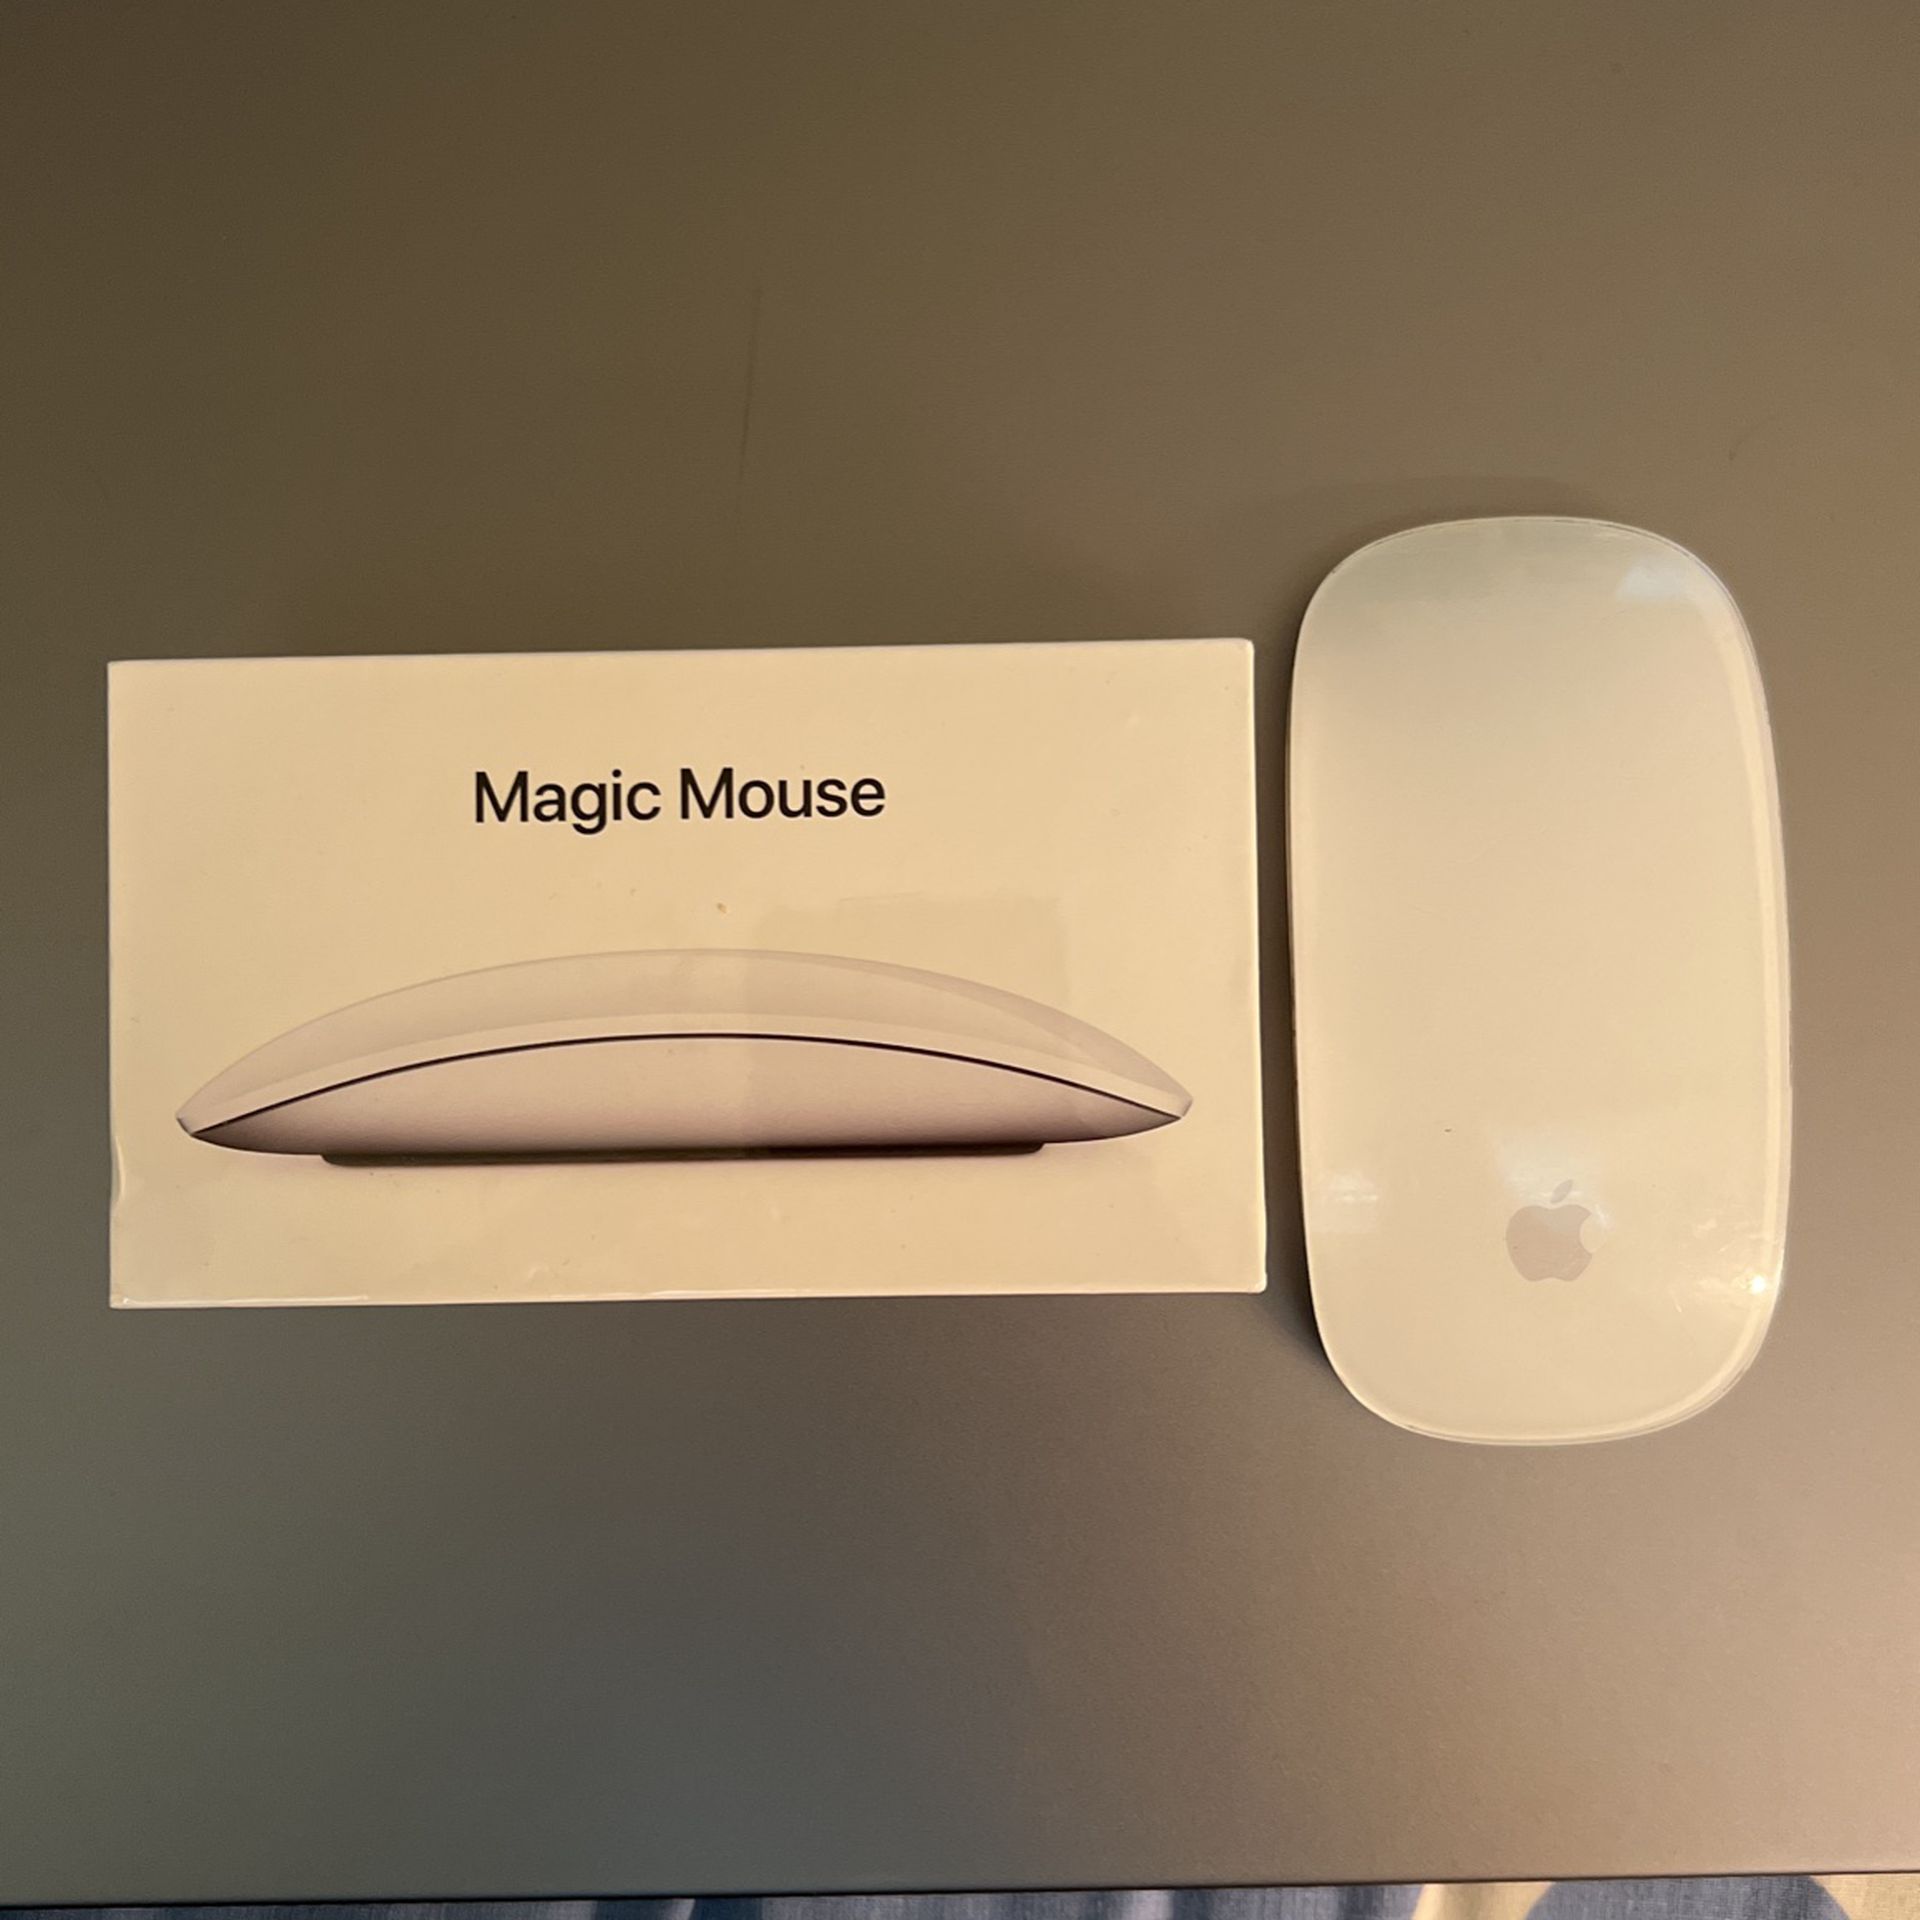 Magic Mouse (Brand New) $65 OBO